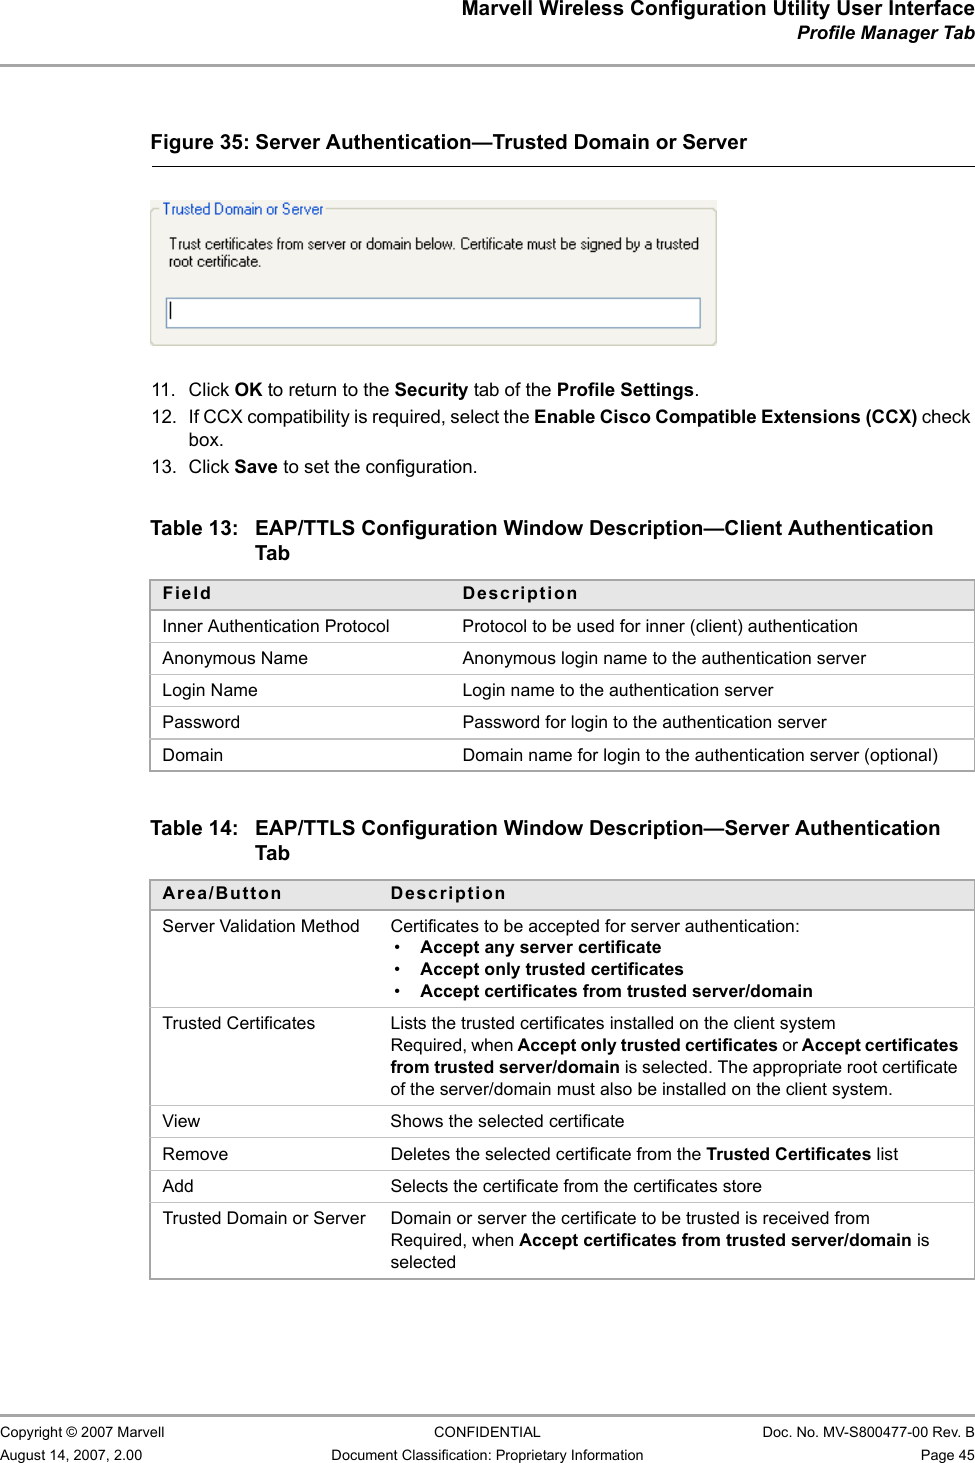 Marvell Wireless Configuration Utility User InterfaceProfile Manager Tab                         Copyright © 2007 Marvell CONFIDENTIAL Doc. No. MV-S800477-00 Rev. BAugust 14, 2007, 2.00 Document Classification: Proprietary Information Page 45                          11. Click OK to return to the Security tab of the Profile Settings.12. If CCX compatibility is required, select the Enable Cisco Compatible Extensions (CCX) check box.13. Click Save to set the configuration.                                                  Figure 35: Server Authentication—Trusted Domain or Server                         Table 13: EAP/TTLS Configuration Window Description—Client Authentication TabField DescriptionInner Authentication Protocol Protocol to be used for inner (client) authenticationAnonymous Name Anonymous login name to the authentication serverLogin Name Login name to the authentication serverPassword Password for login to the authentication serverDomain Domain name for login to the authentication server (optional)Table 14: EAP/TTLS Configuration Window Description—Server Authentication TabArea/Button DescriptionServer Validation Method Certificates to be accepted for server authentication:•Accept any server certificate•Accept only trusted certificates•Accept certificates from trusted server/domainTrusted Certificates Lists the trusted certificates installed on the client systemRequired, when Accept only trusted certificates or Accept certificates from trusted server/domain is selected. The appropriate root certificate of the server/domain must also be installed on the client system.View Shows the selected certificateRemove Deletes the selected certificate from the Trusted Certificates listAdd Selects the certificate from the certificates storeTrusted Domain or Server Domain or server the certificate to be trusted is received fromRequired, when Accept certificates from trusted server/domain is selected